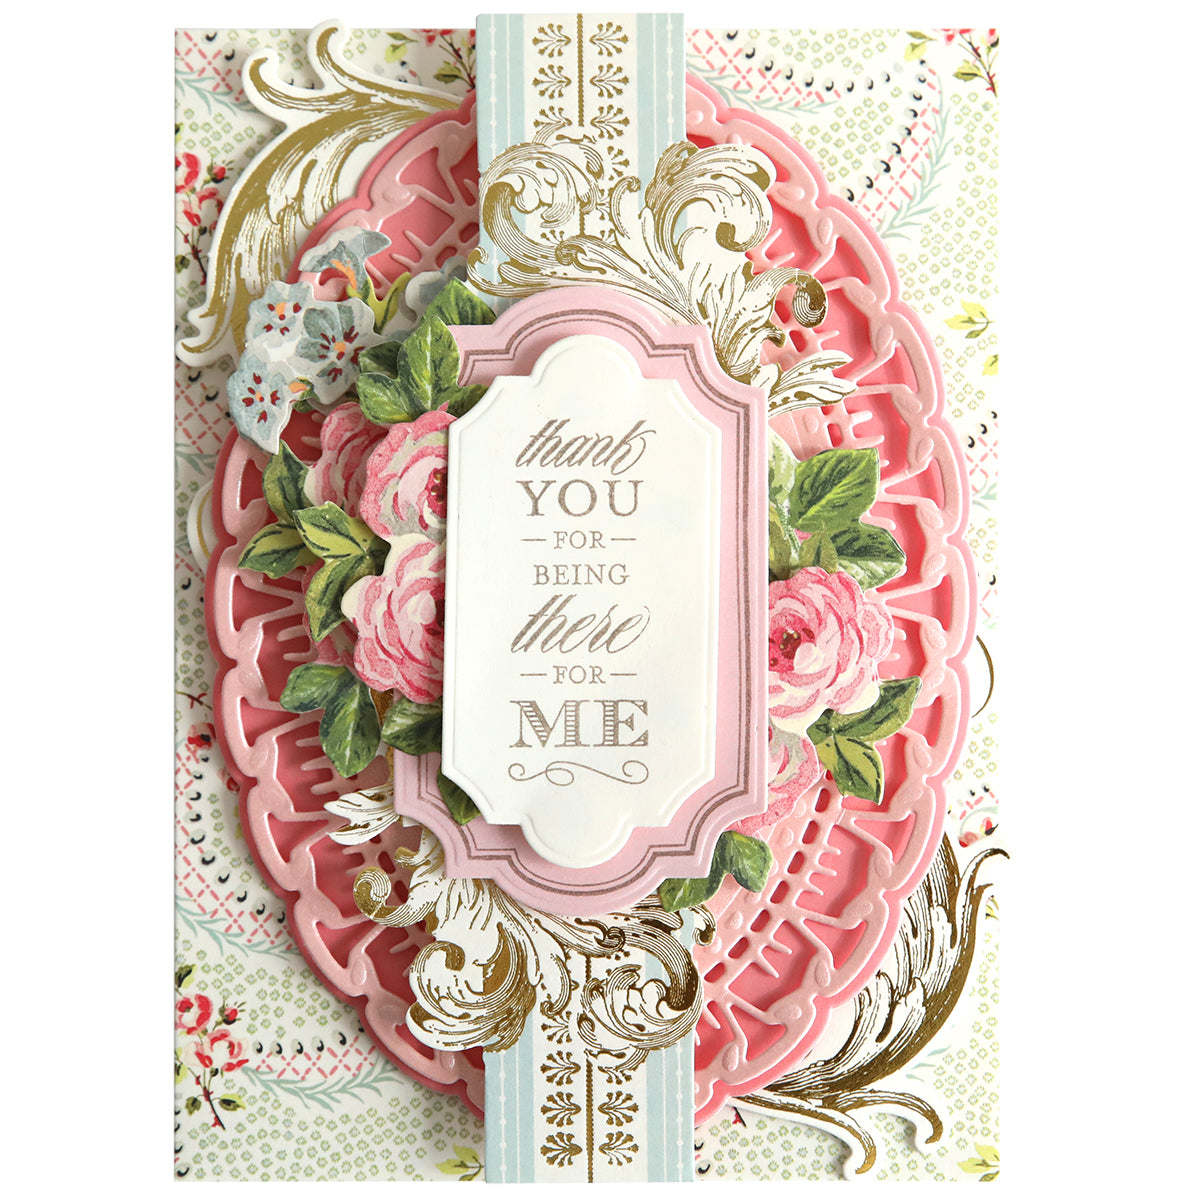 An ornate thank-you card featuring elaborate gold designs, floral patterns, and a central pink motif with Fantastic Sentiment Stamps and Dies and the text "thank you for being there for me.